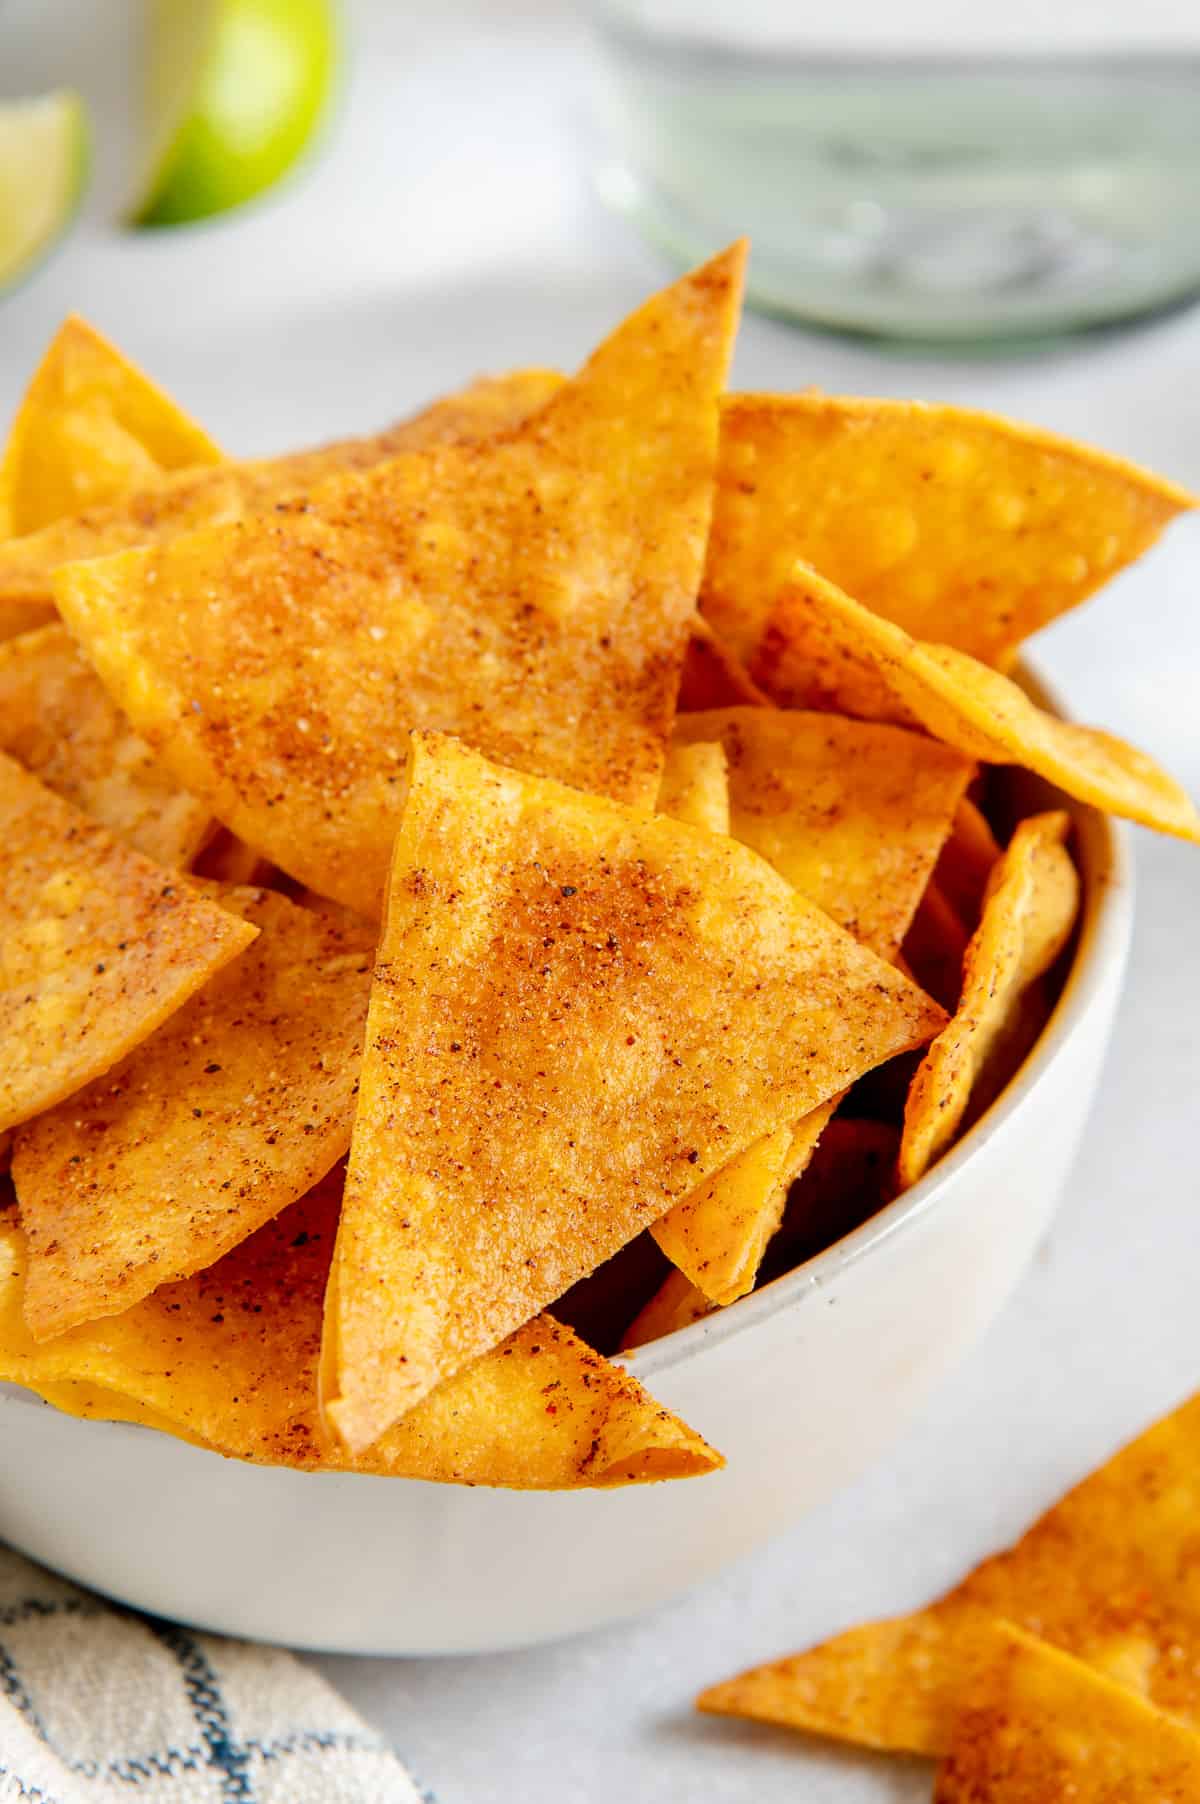 Upclose of a crispy and crunchy tortilla chip.